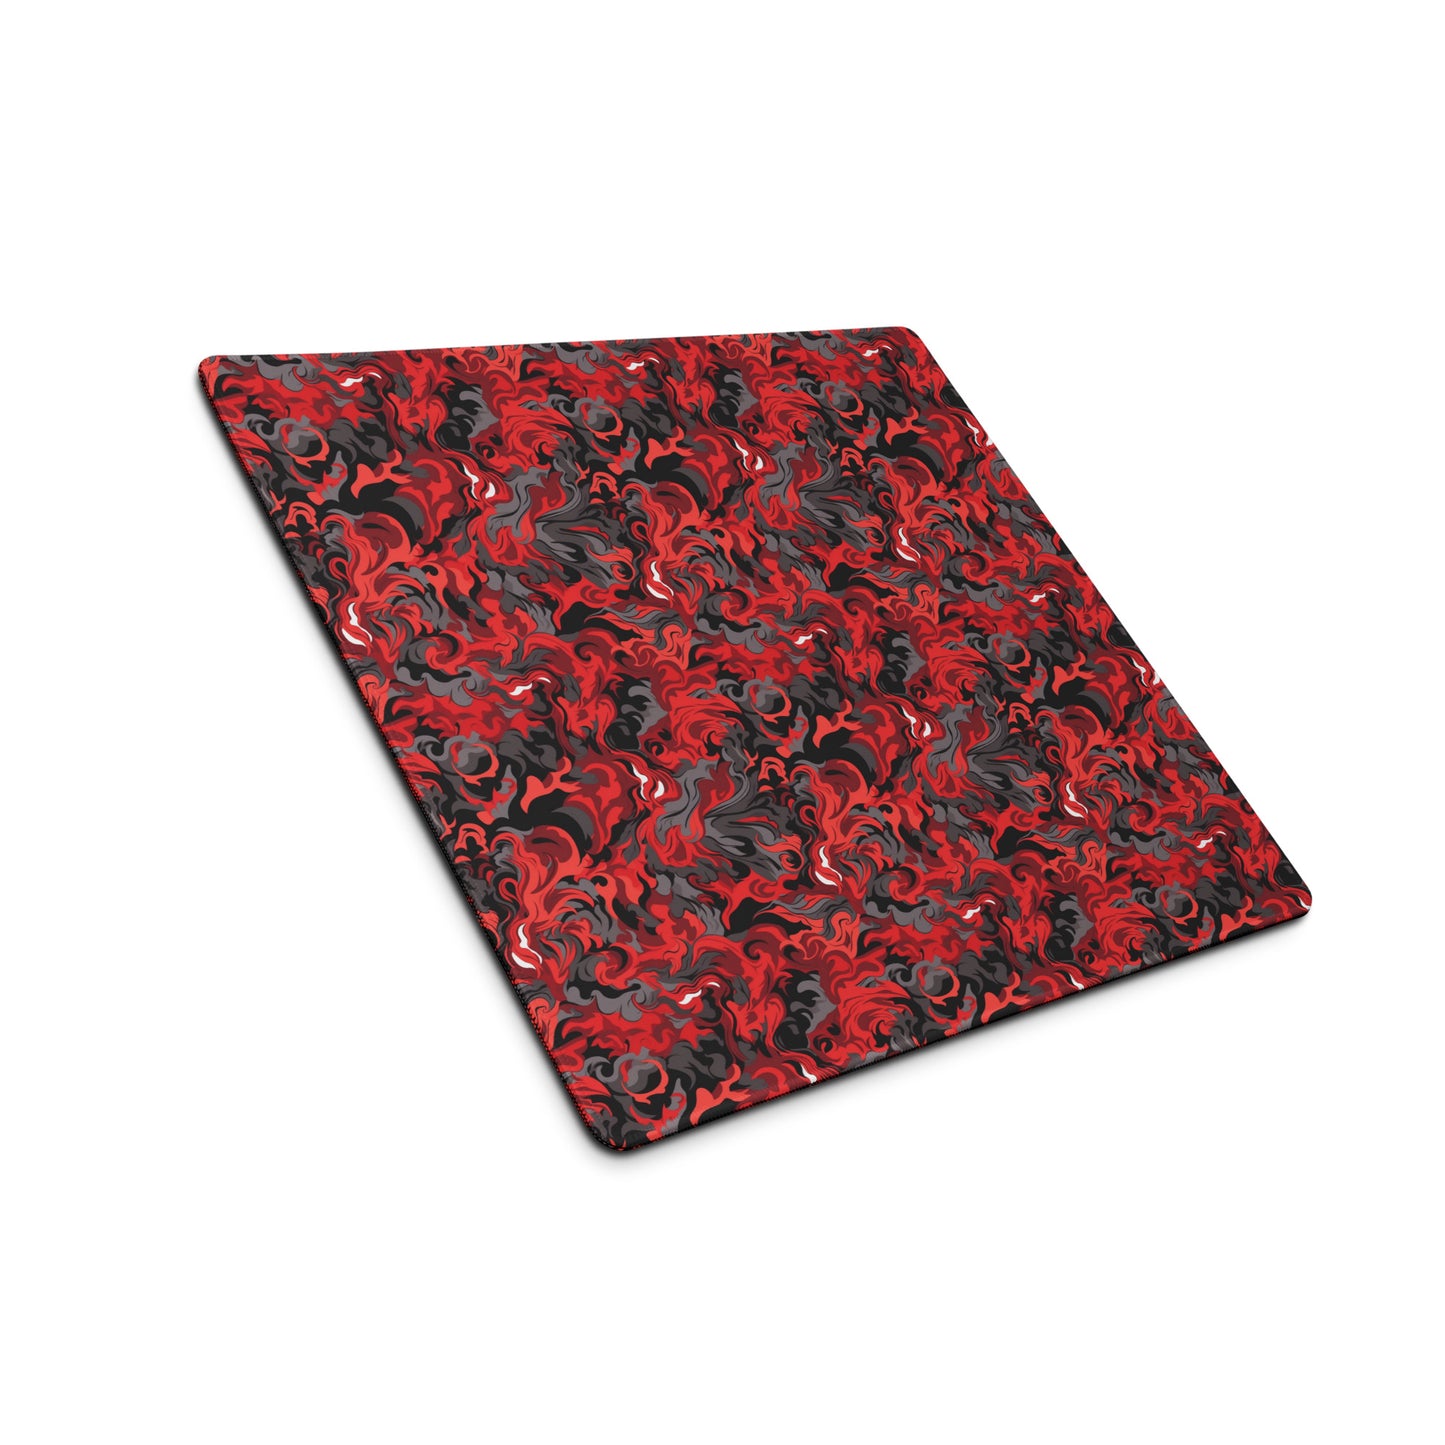 A 18" x 16" desk pad with a black and red camo pattern sitting at an angle.